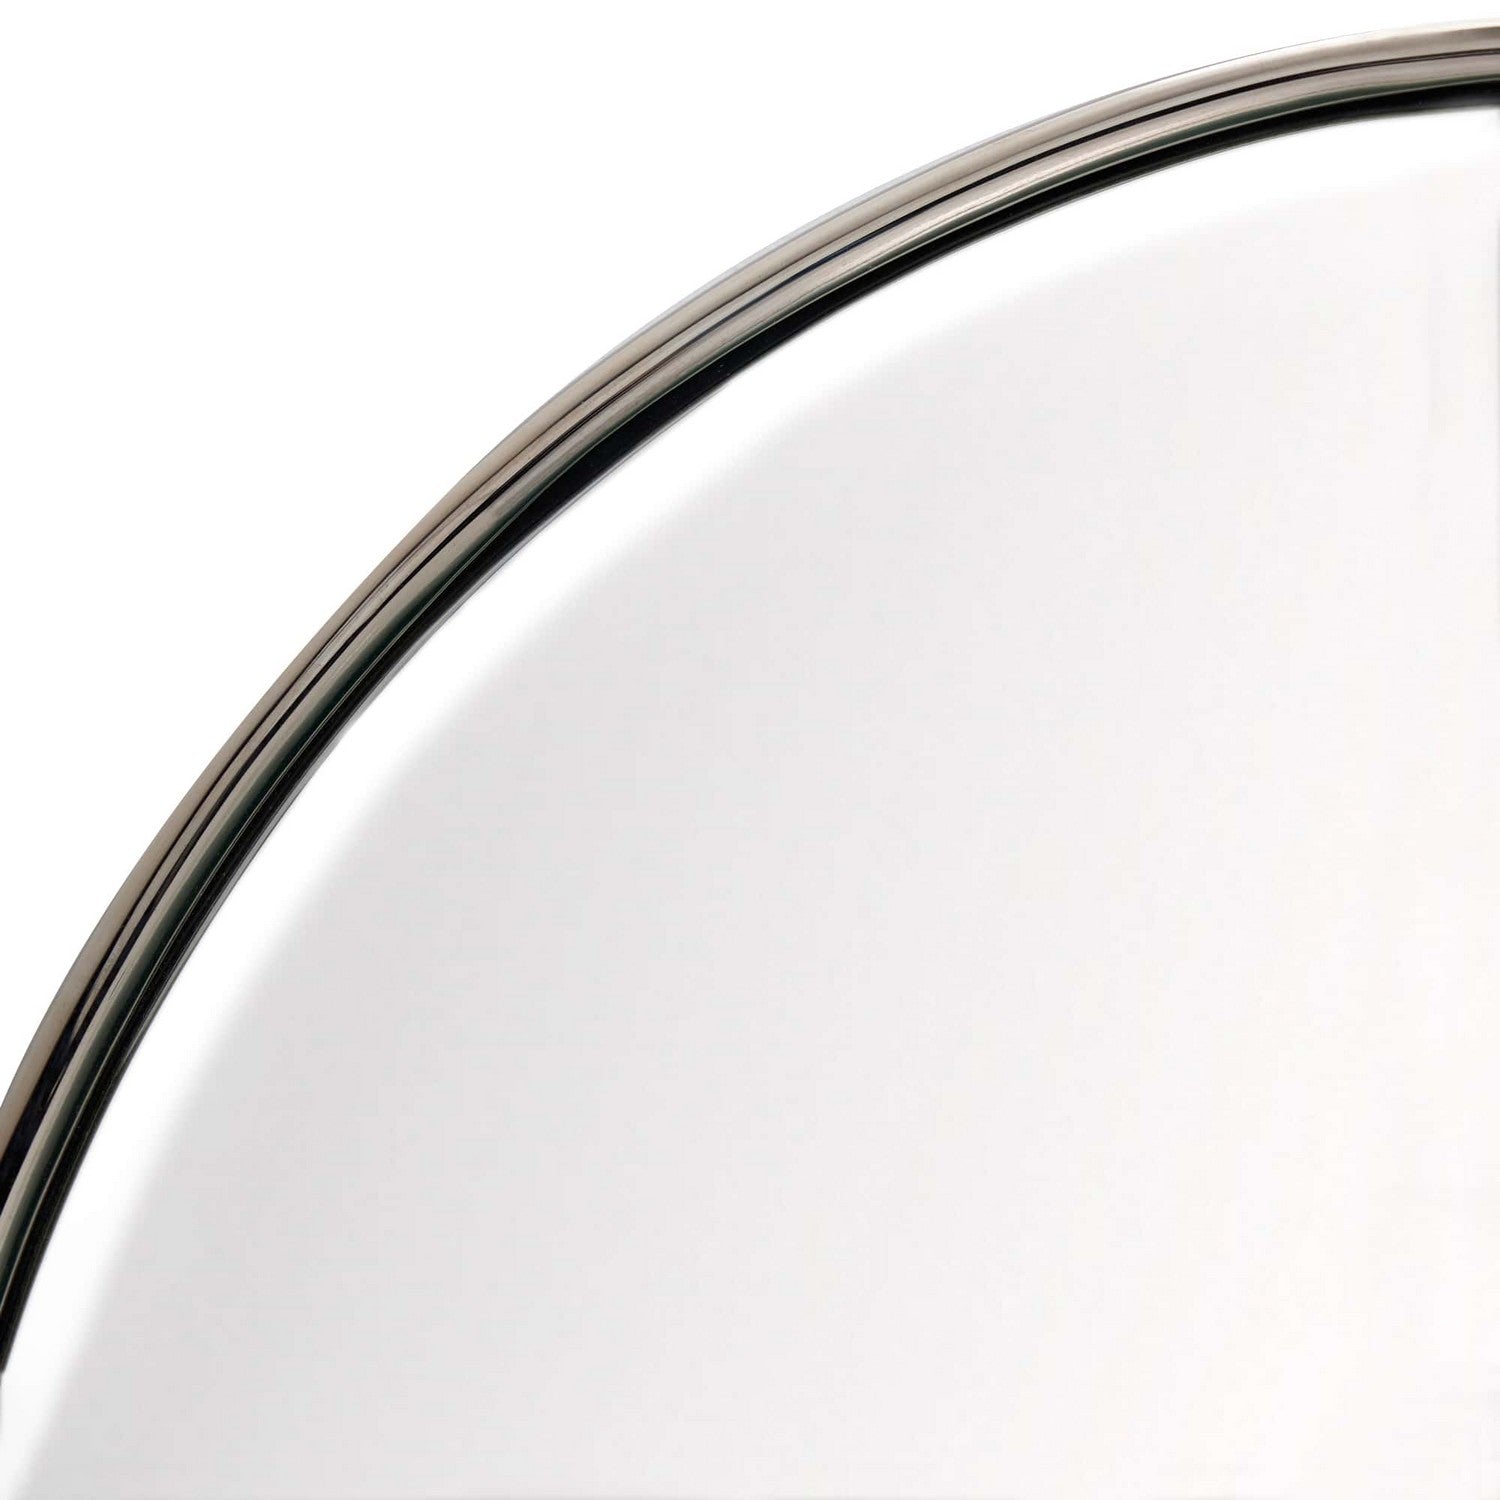 Mirror from the Vaquero collection in Polished Nickel finish